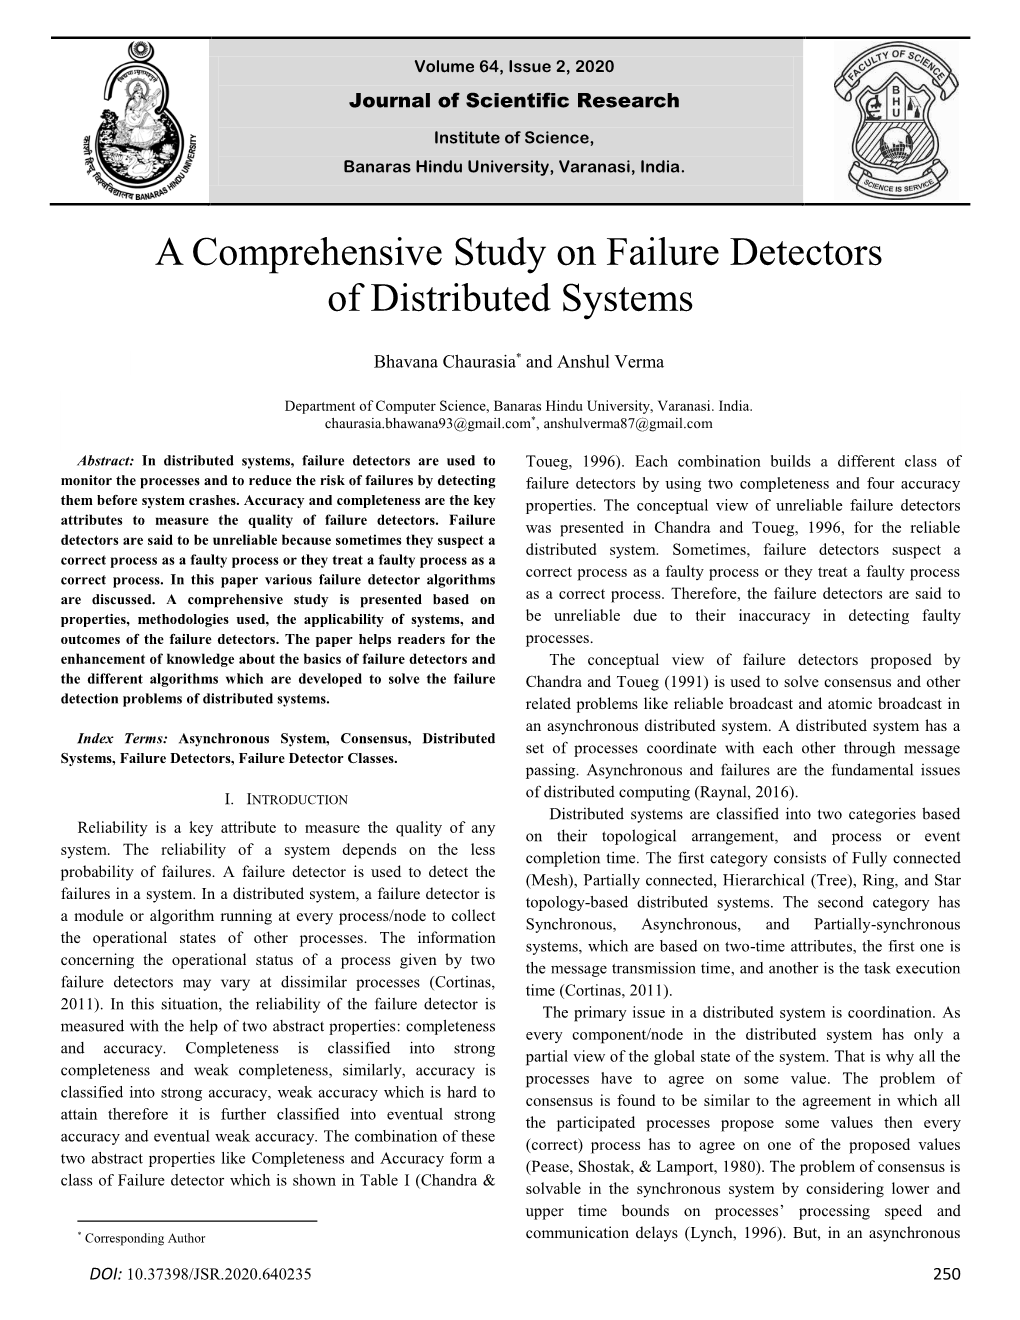 A Comprehensive Study on Failure Detectors of Distributed Systems